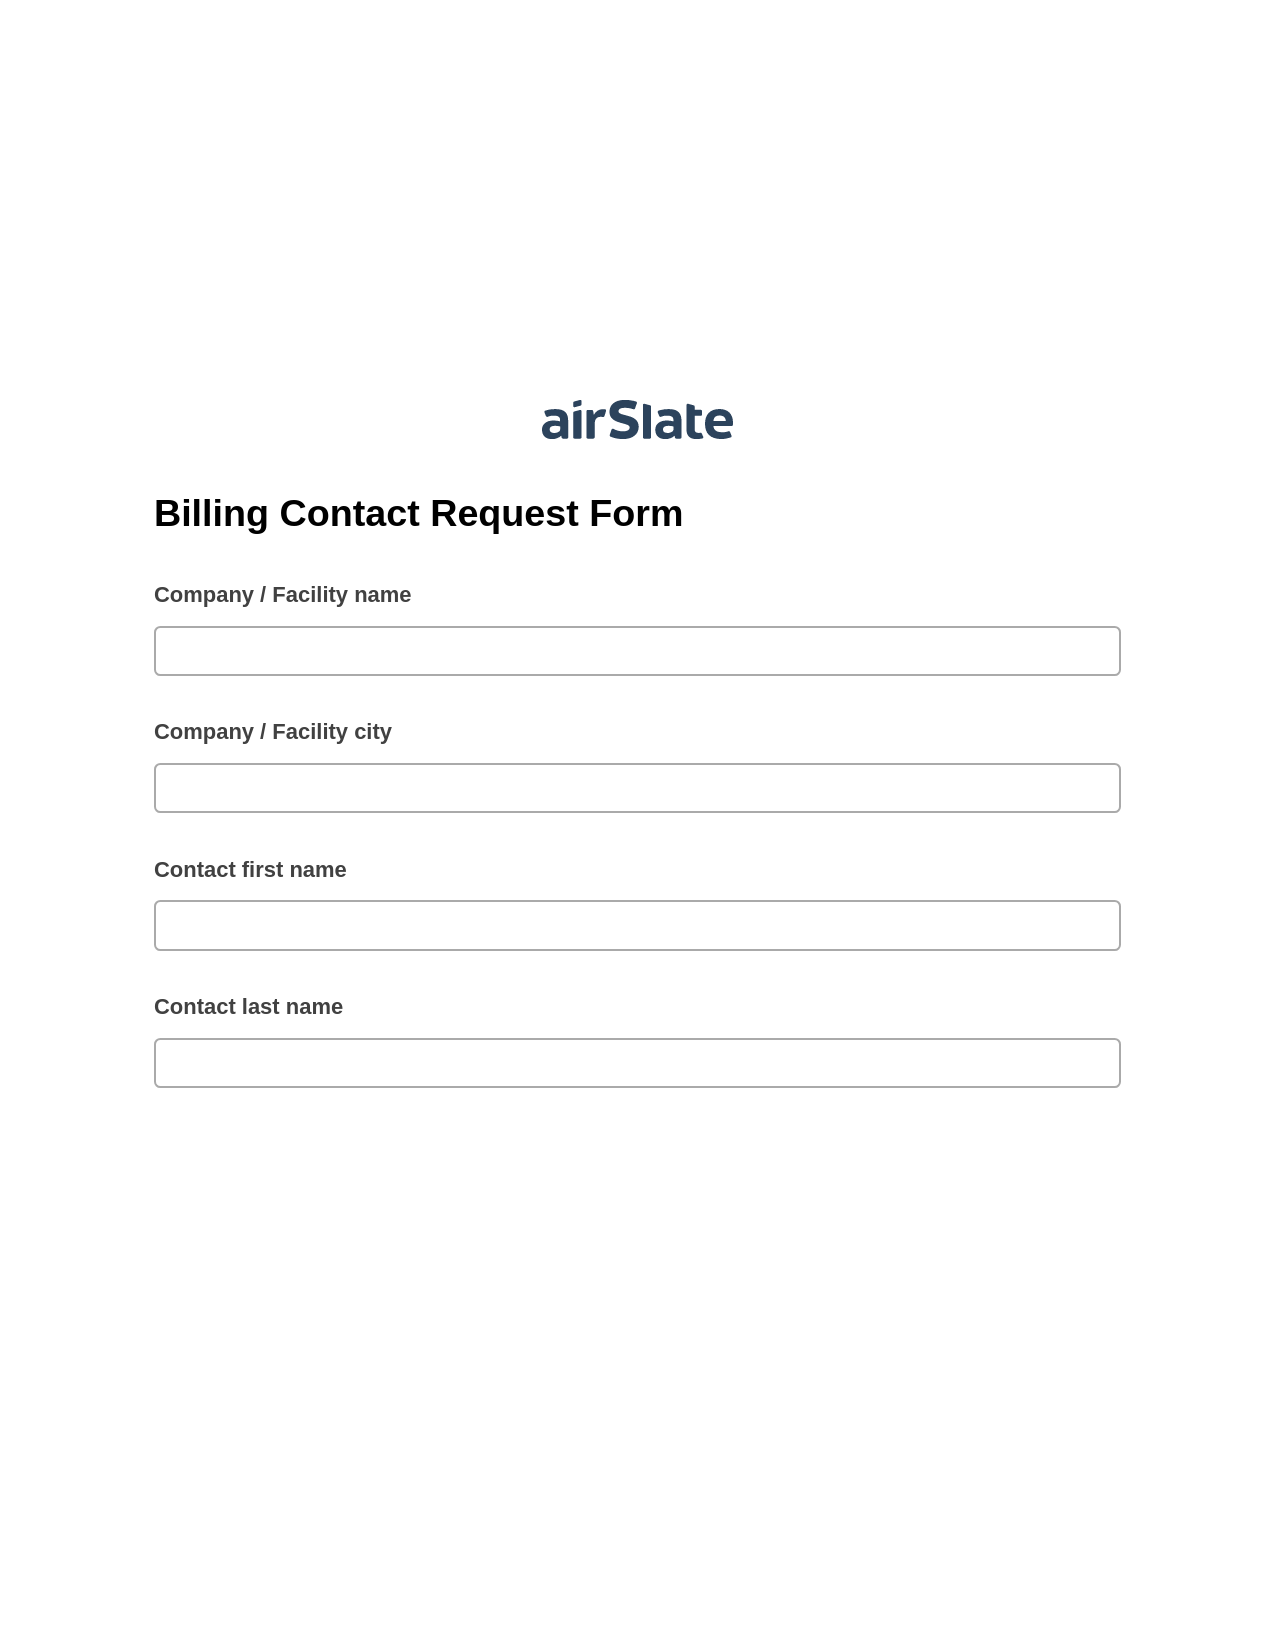 Multirole Billing Contact Request Form Pre-fill Dropdown from Airtable, Create Slate every Google Sheet Update Bot, Export to Google Sheet Bot